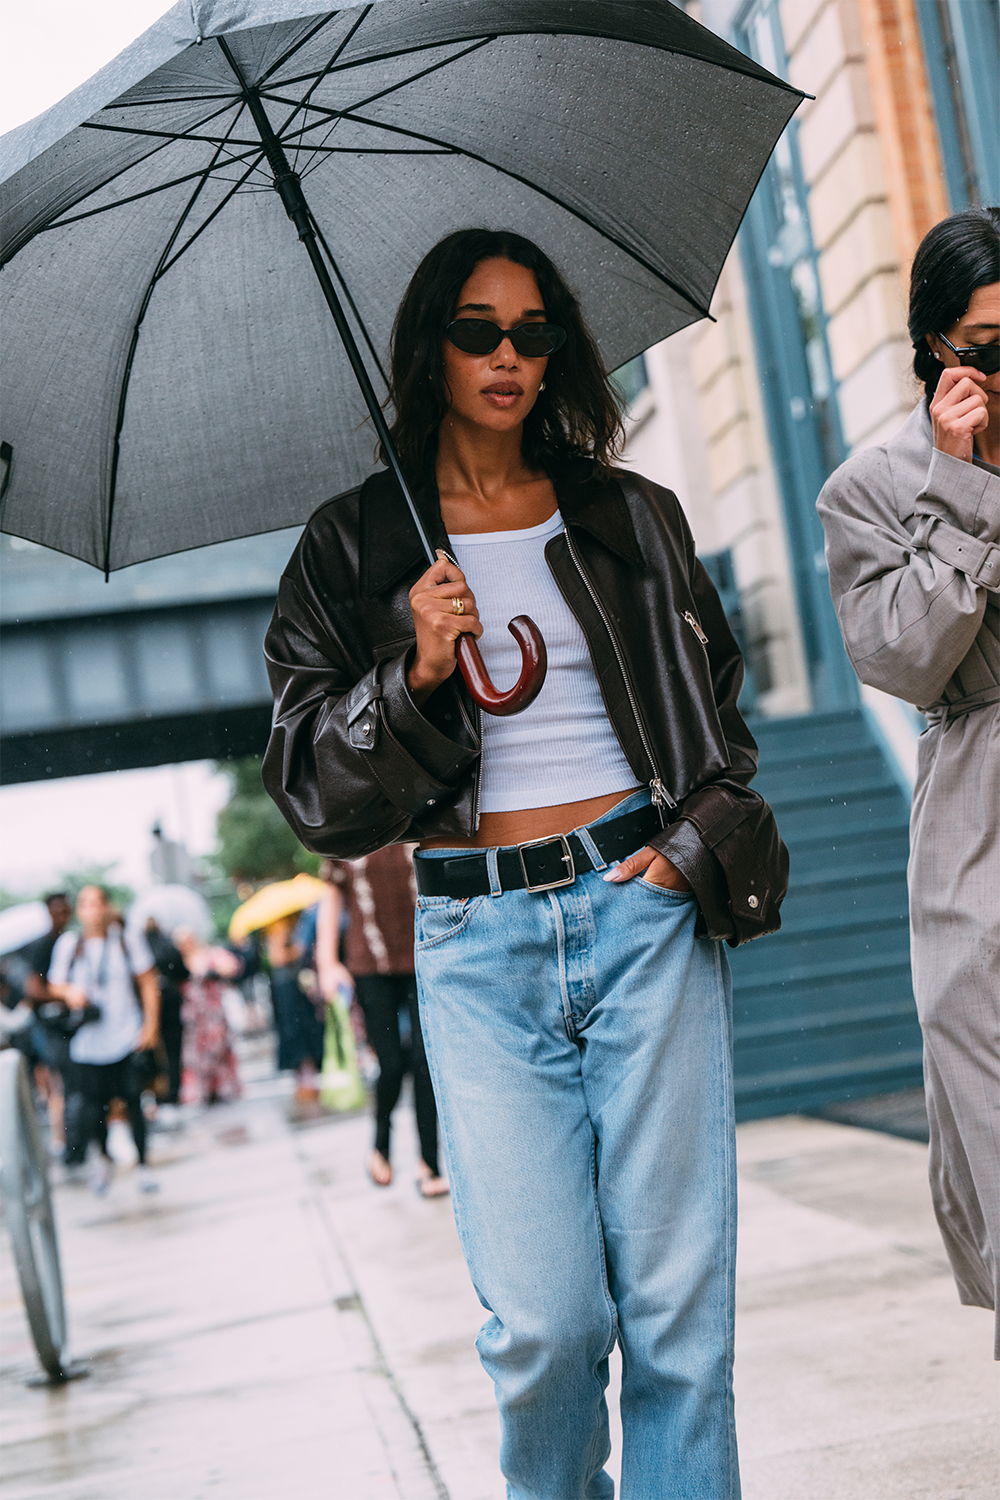 And Now, 8 Key New York Street Style Shopping Finds